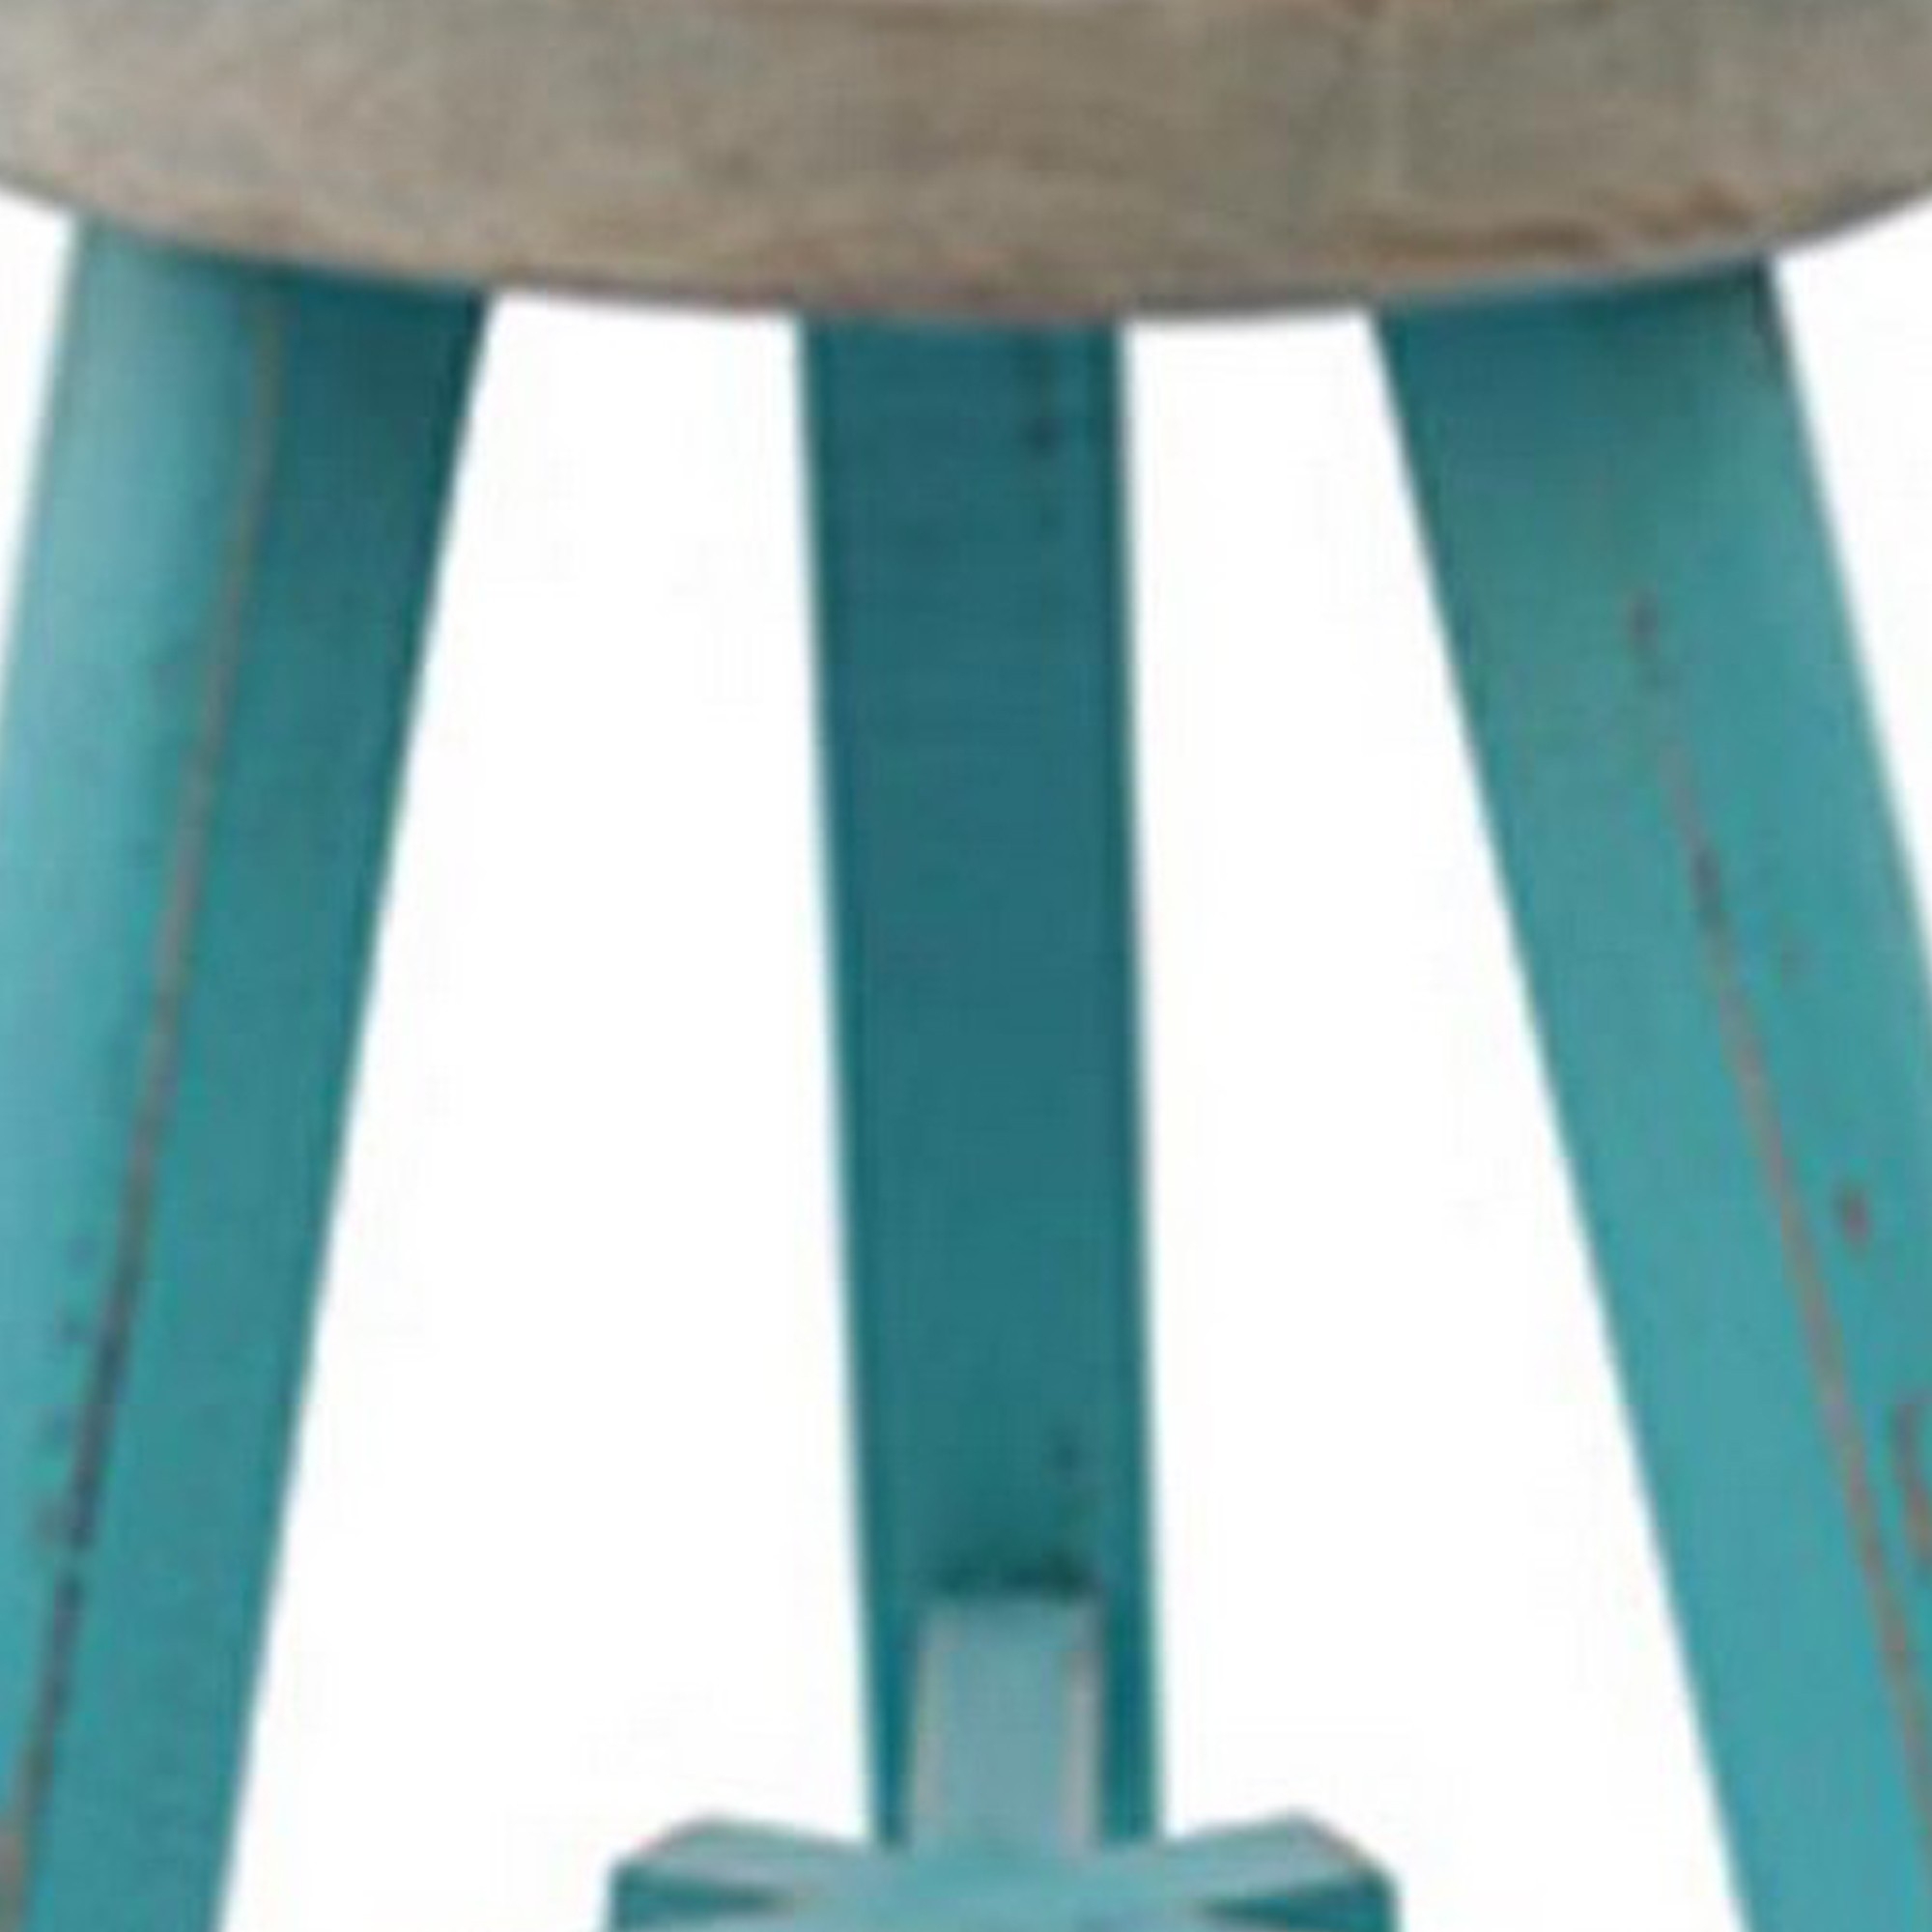 17 Inch Wood Accent Stool, Brown Seat, Hand Painted Turquoise Tripod Legs - Saltoro Sherpi